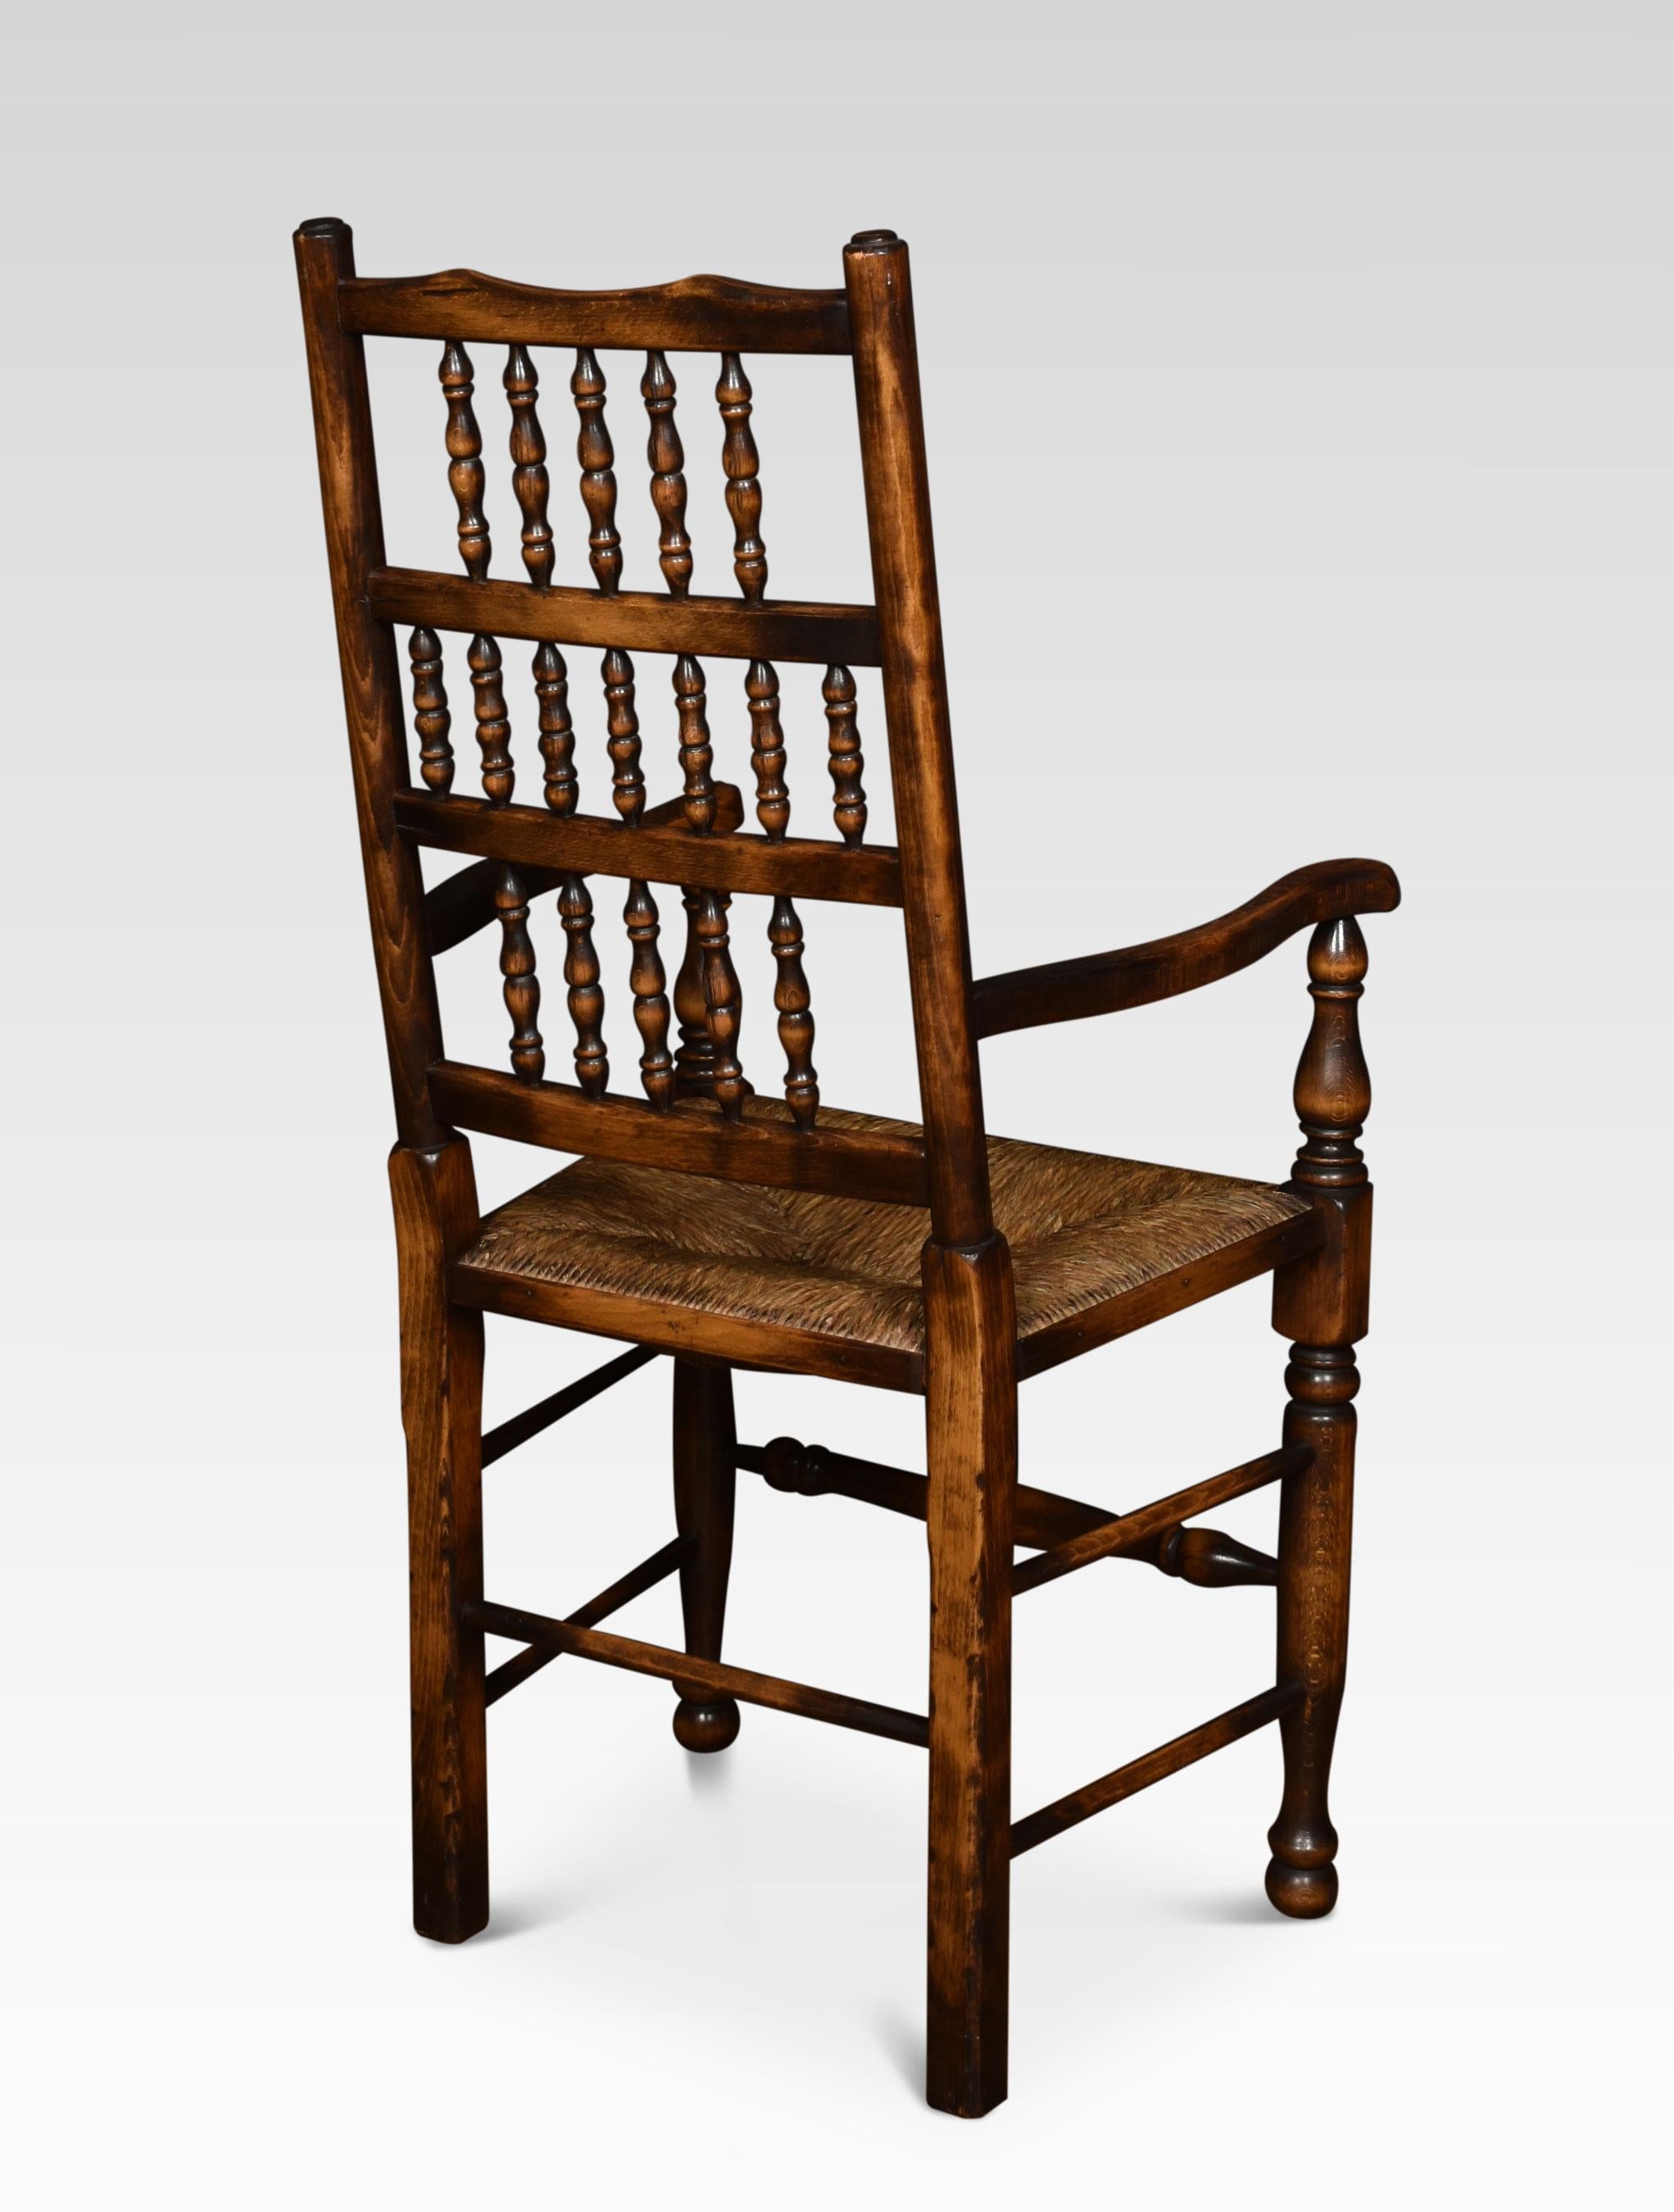 Set of eight ash dining chairs comprising two carvers and six chairs. The spindle backs above rush seats on turned front legs united by stretchers.
Measures: Armchairs
Height 43.5 inches Height to seat 19.5 inches
Width 22 inches
Depth 19.5